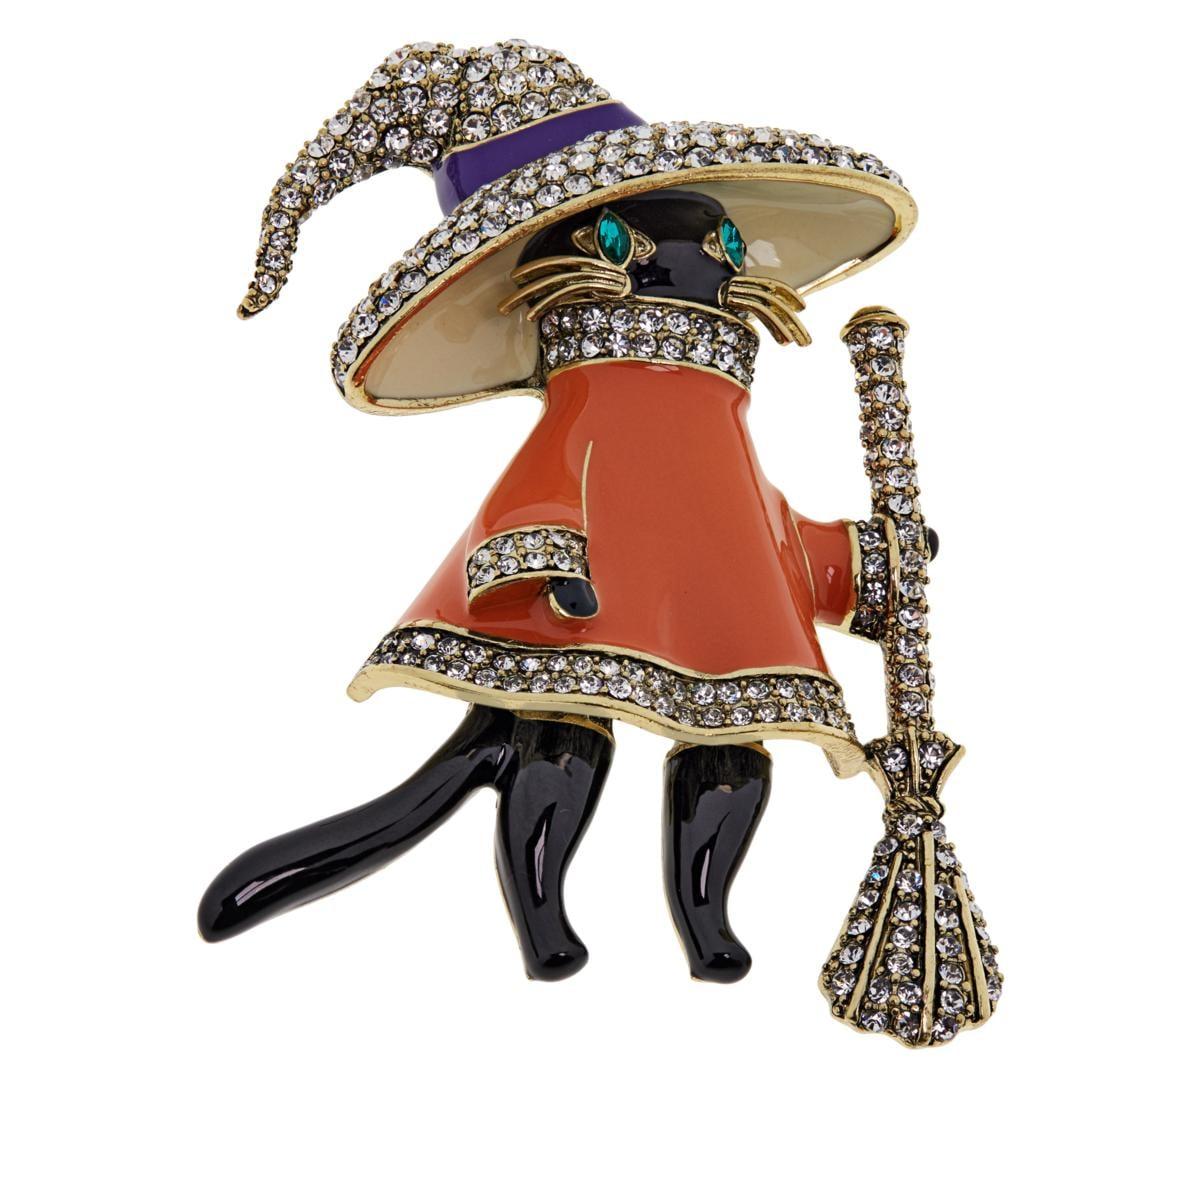 Pucker up! The perfect cat may not exist, but the perfect jewelry does. This whimsical cat with broom design is waiting for you to transform your look with its sparkling style on Halloween creating magic.

Design Information
Dimensional cat design